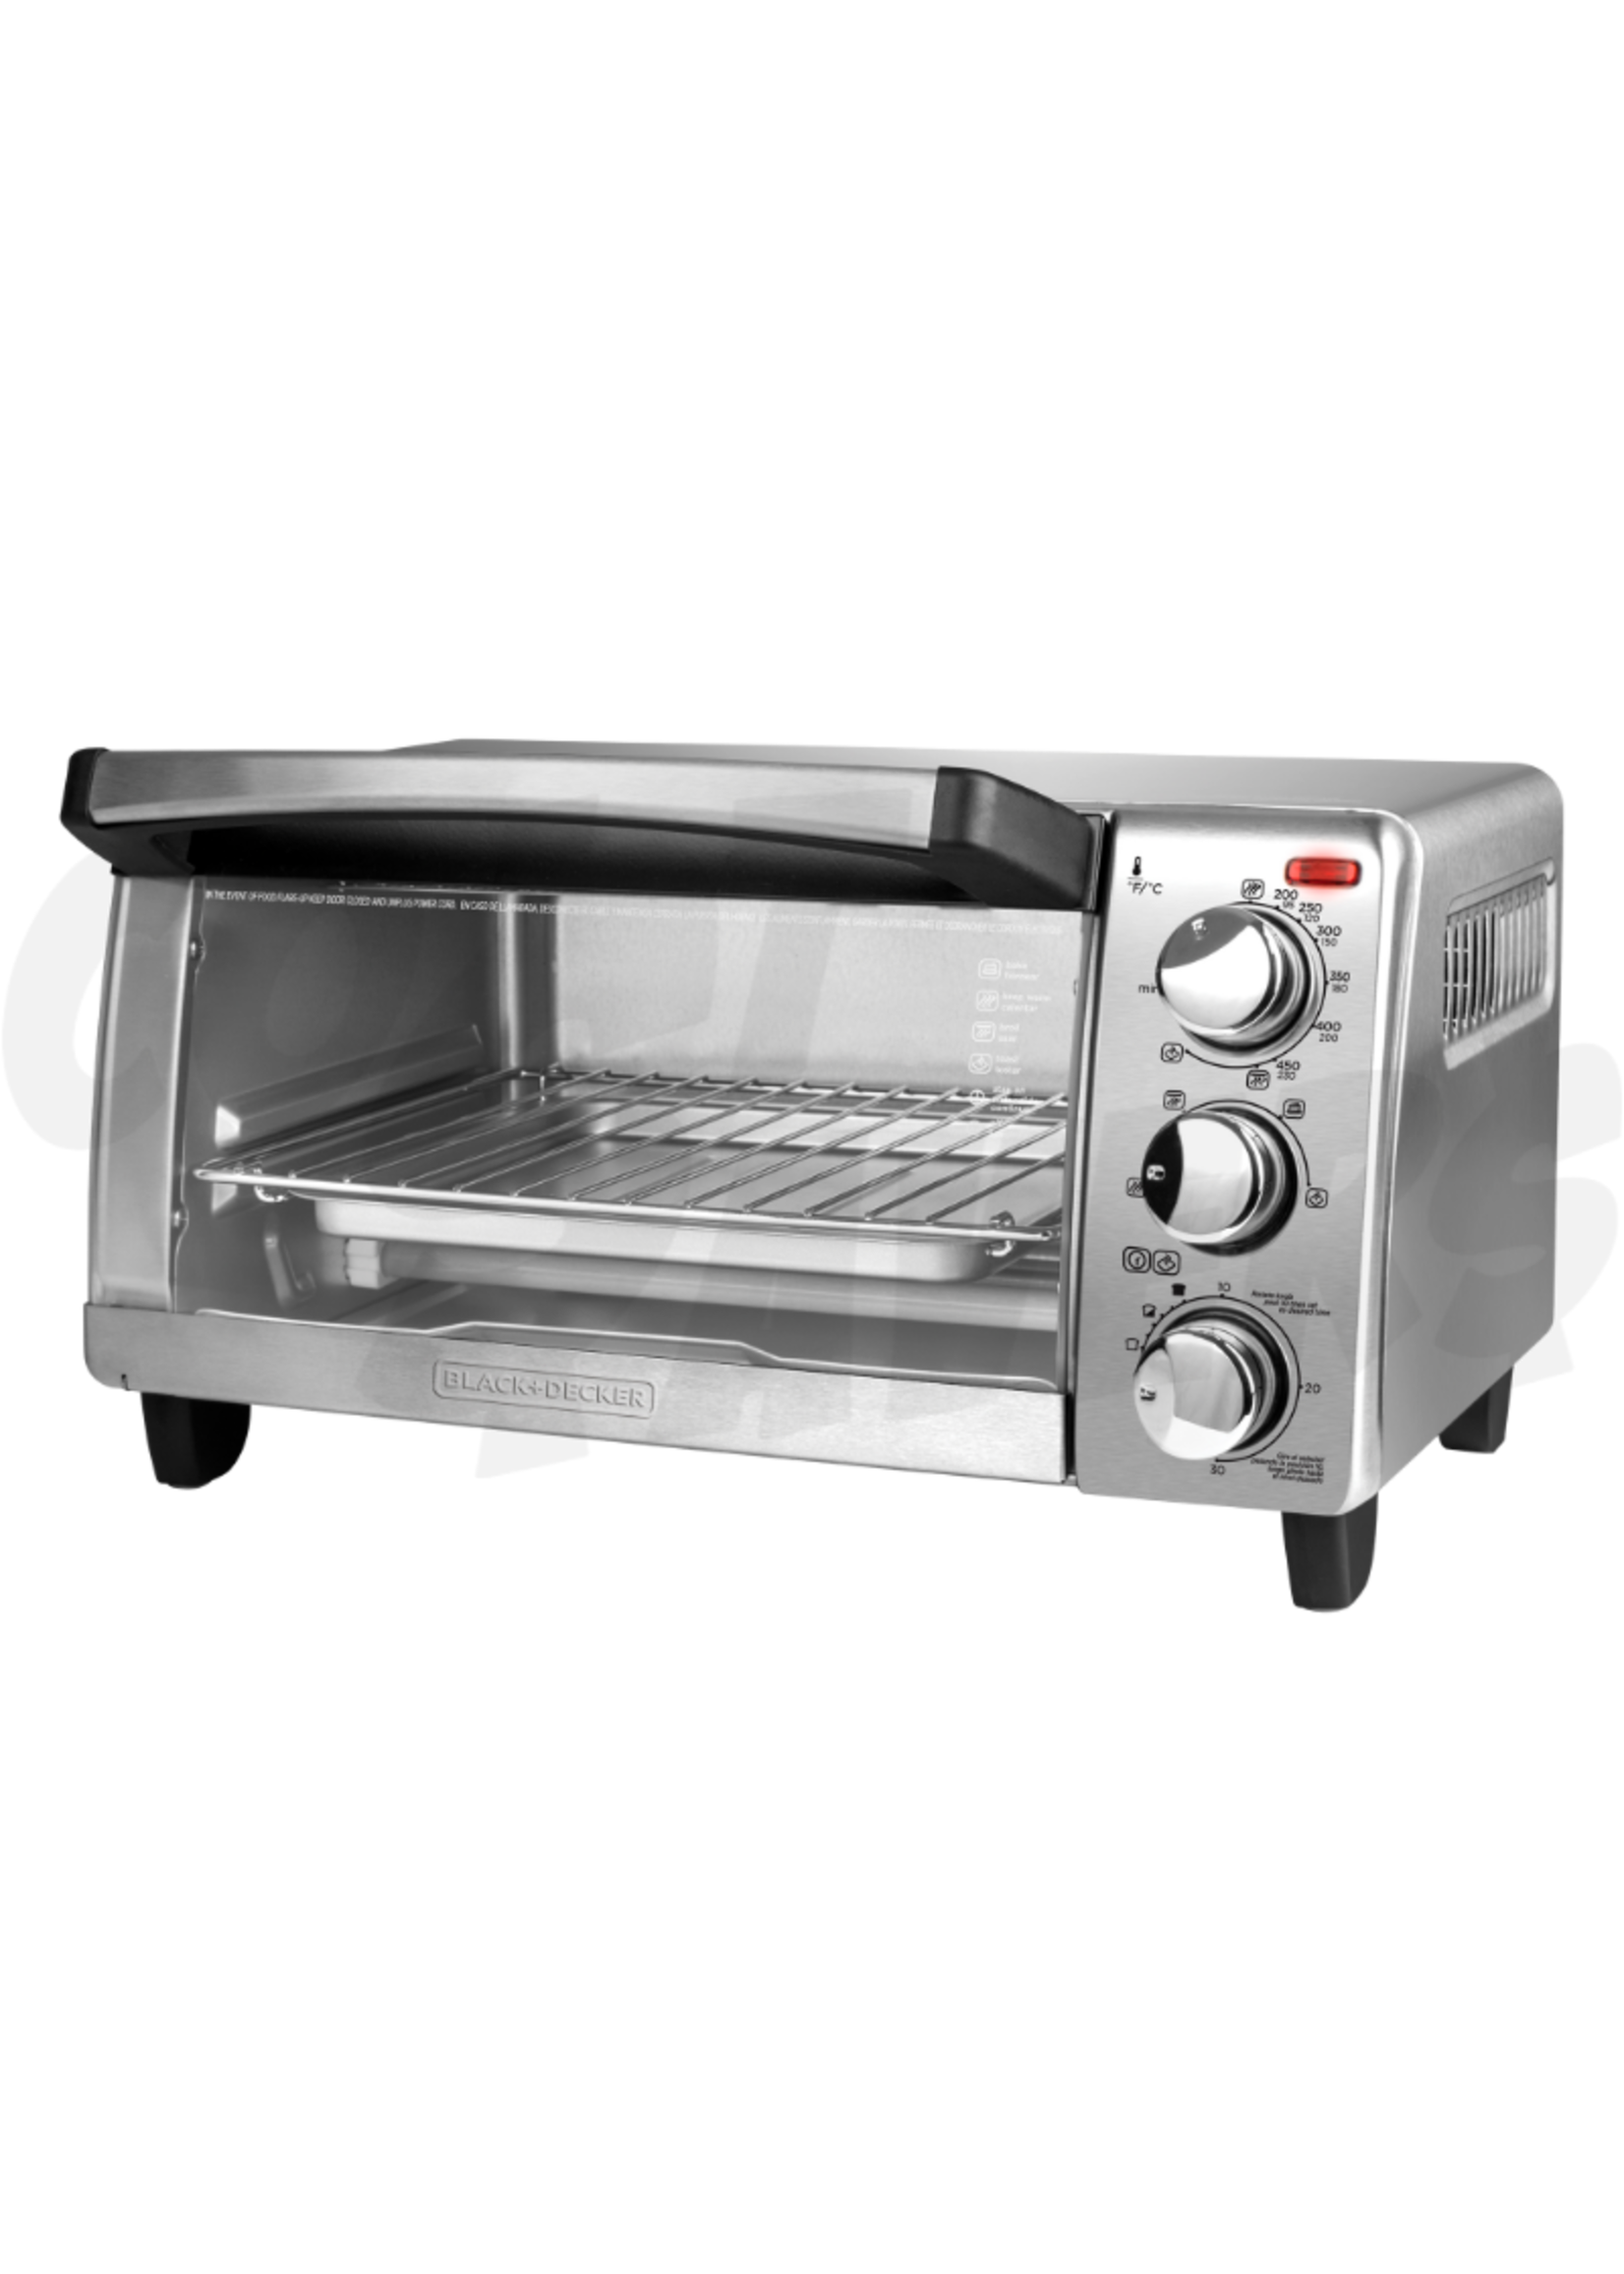 BLACK+DECKER 4 Slice Natural Convection Toaster Oven - Silver - TO1745SSG 1  ct